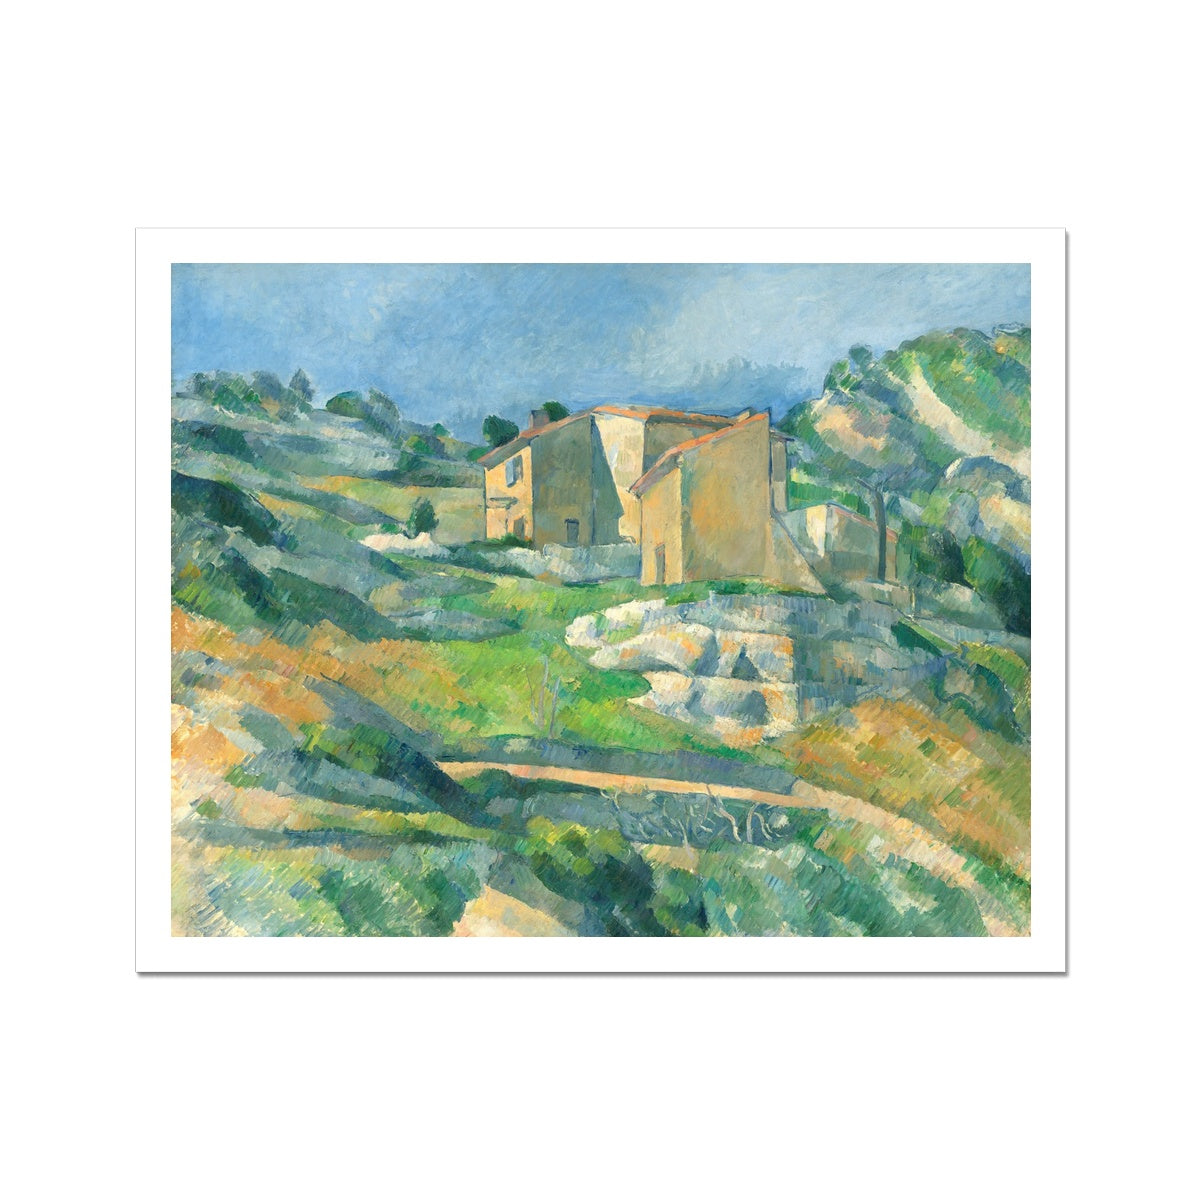 'Houses in Provence, the Riaux Valley near Estaque' by Paul Cézanne. Open Edition Fine Art Print. Historic Art